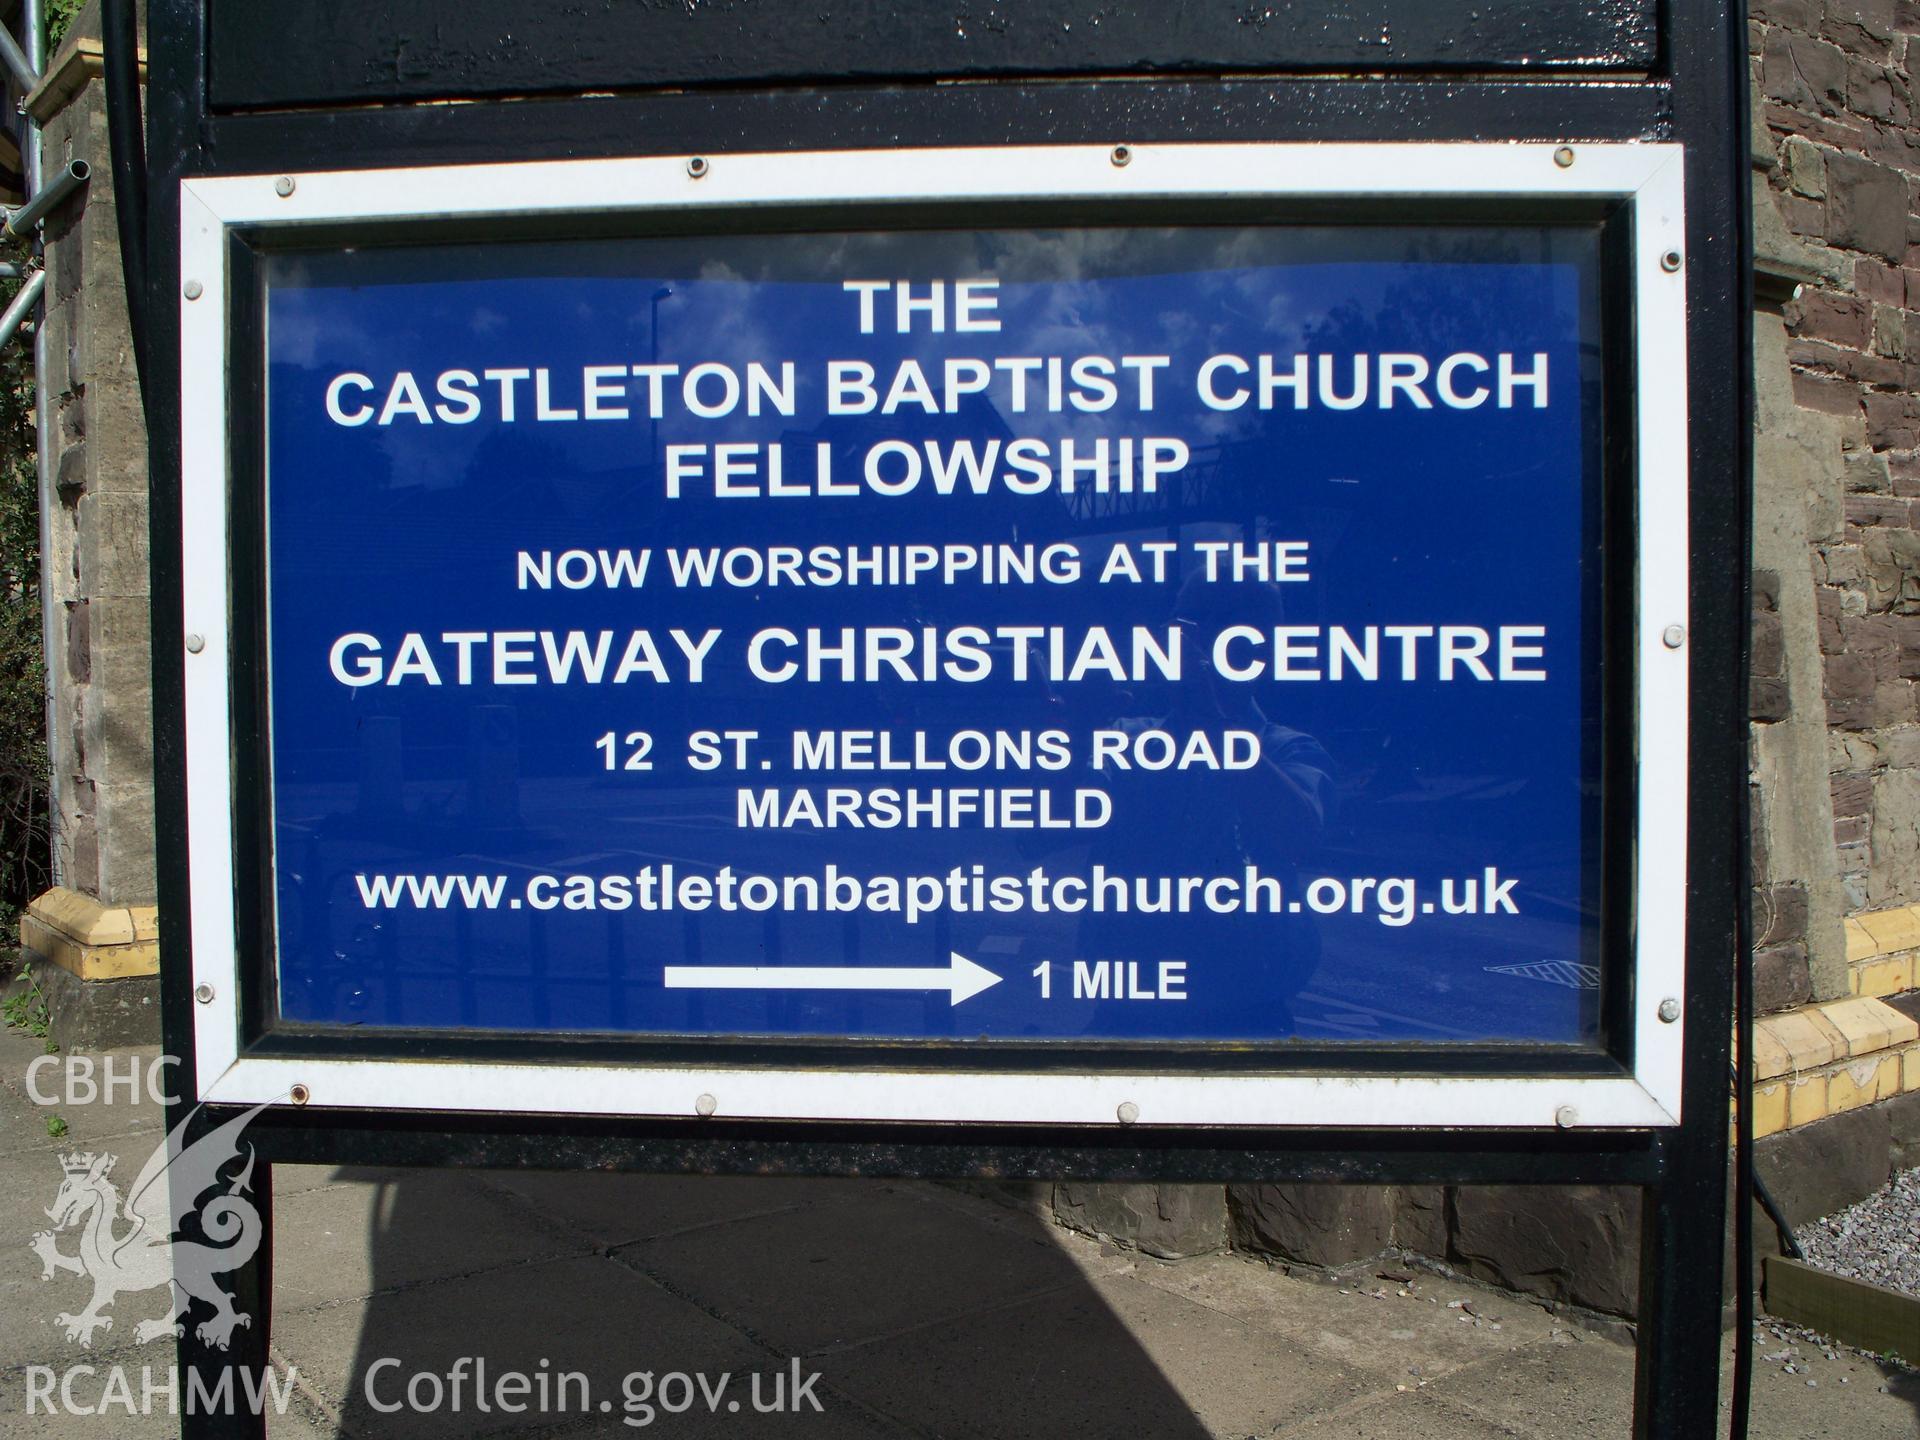 Sign for 'Castleton Baptist Church' announcing alternative place of worship.